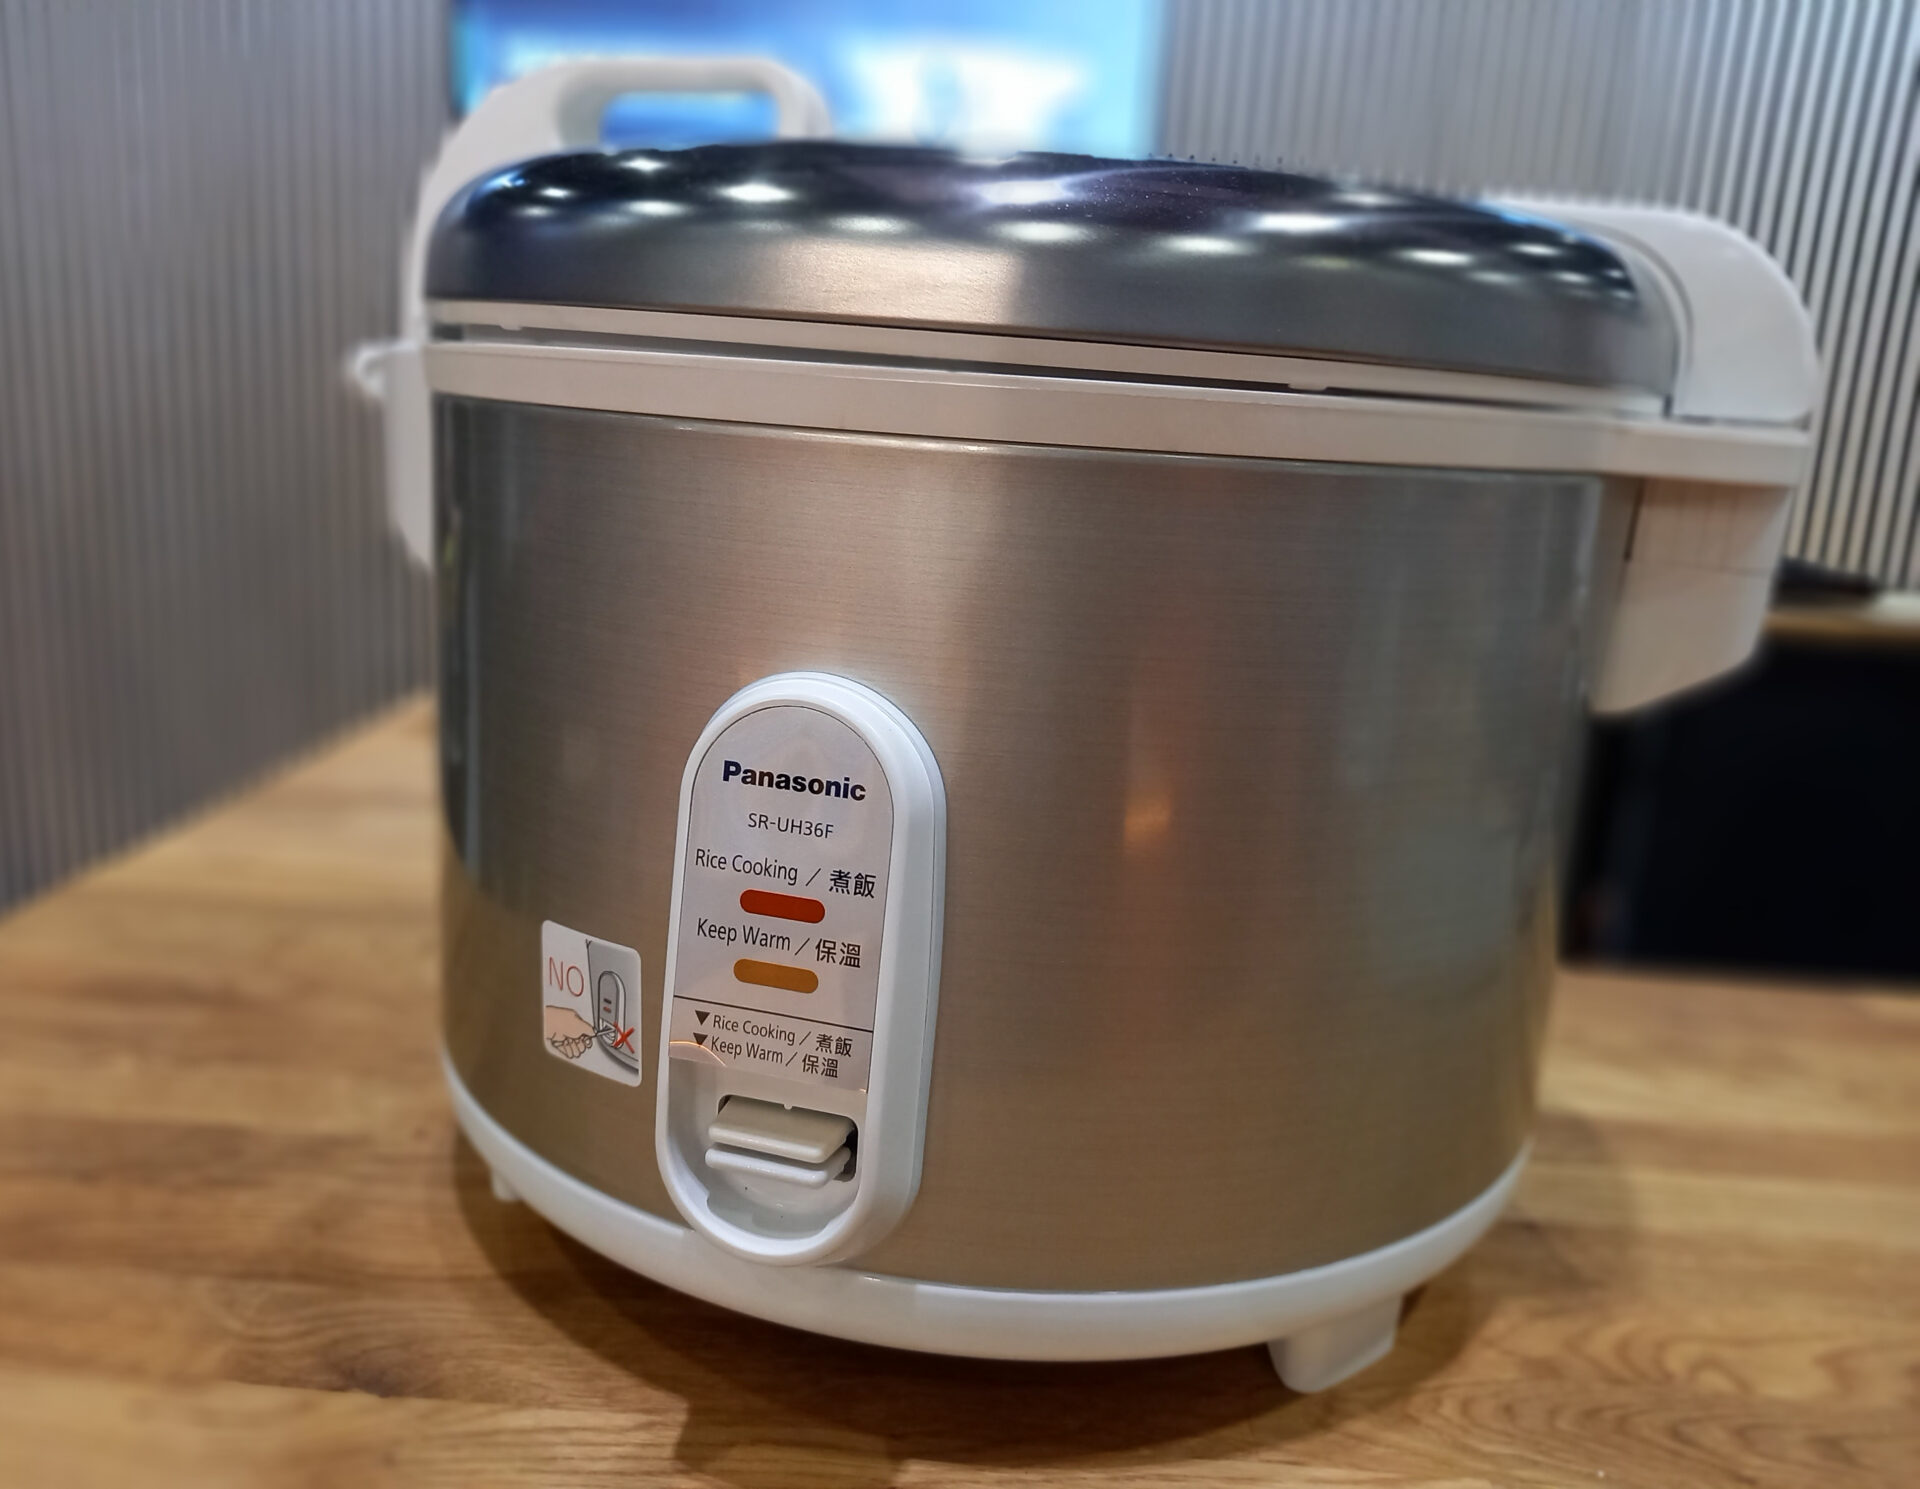 Panasonic boosts offer with new electronic rice cooker